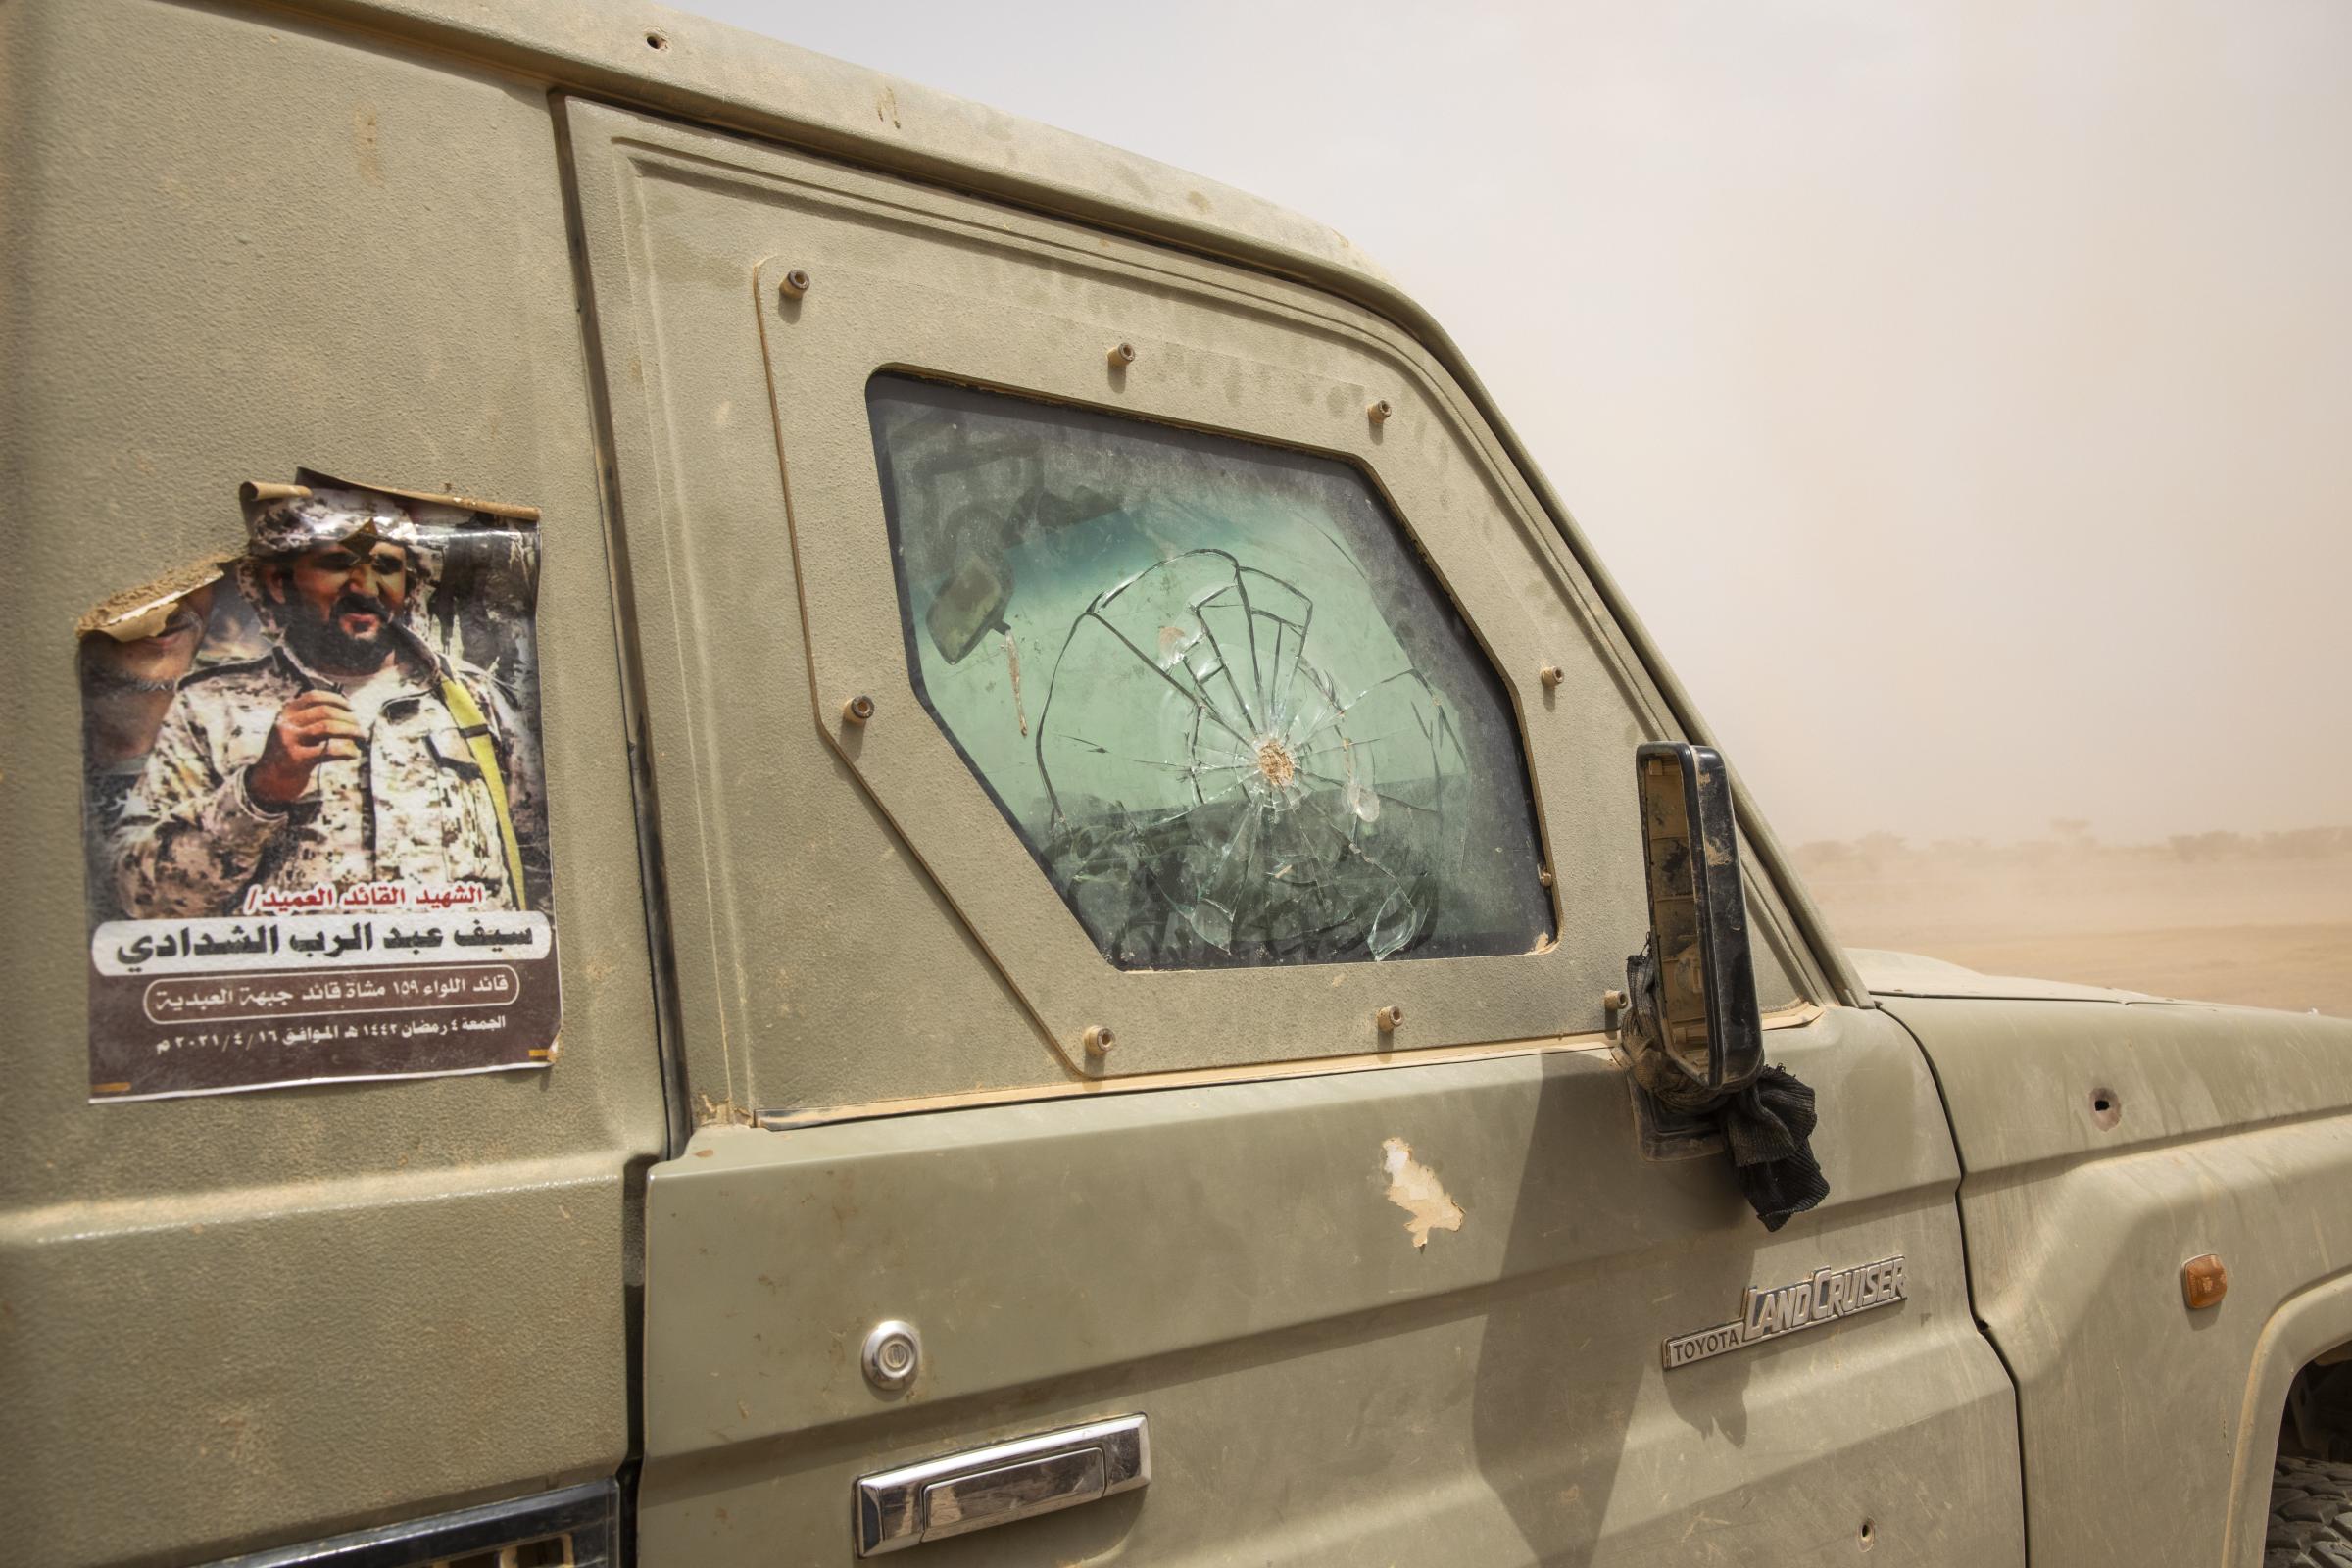 Battle for key city Marib intensifies -  A poster of a commander brigadier general and Arabic...